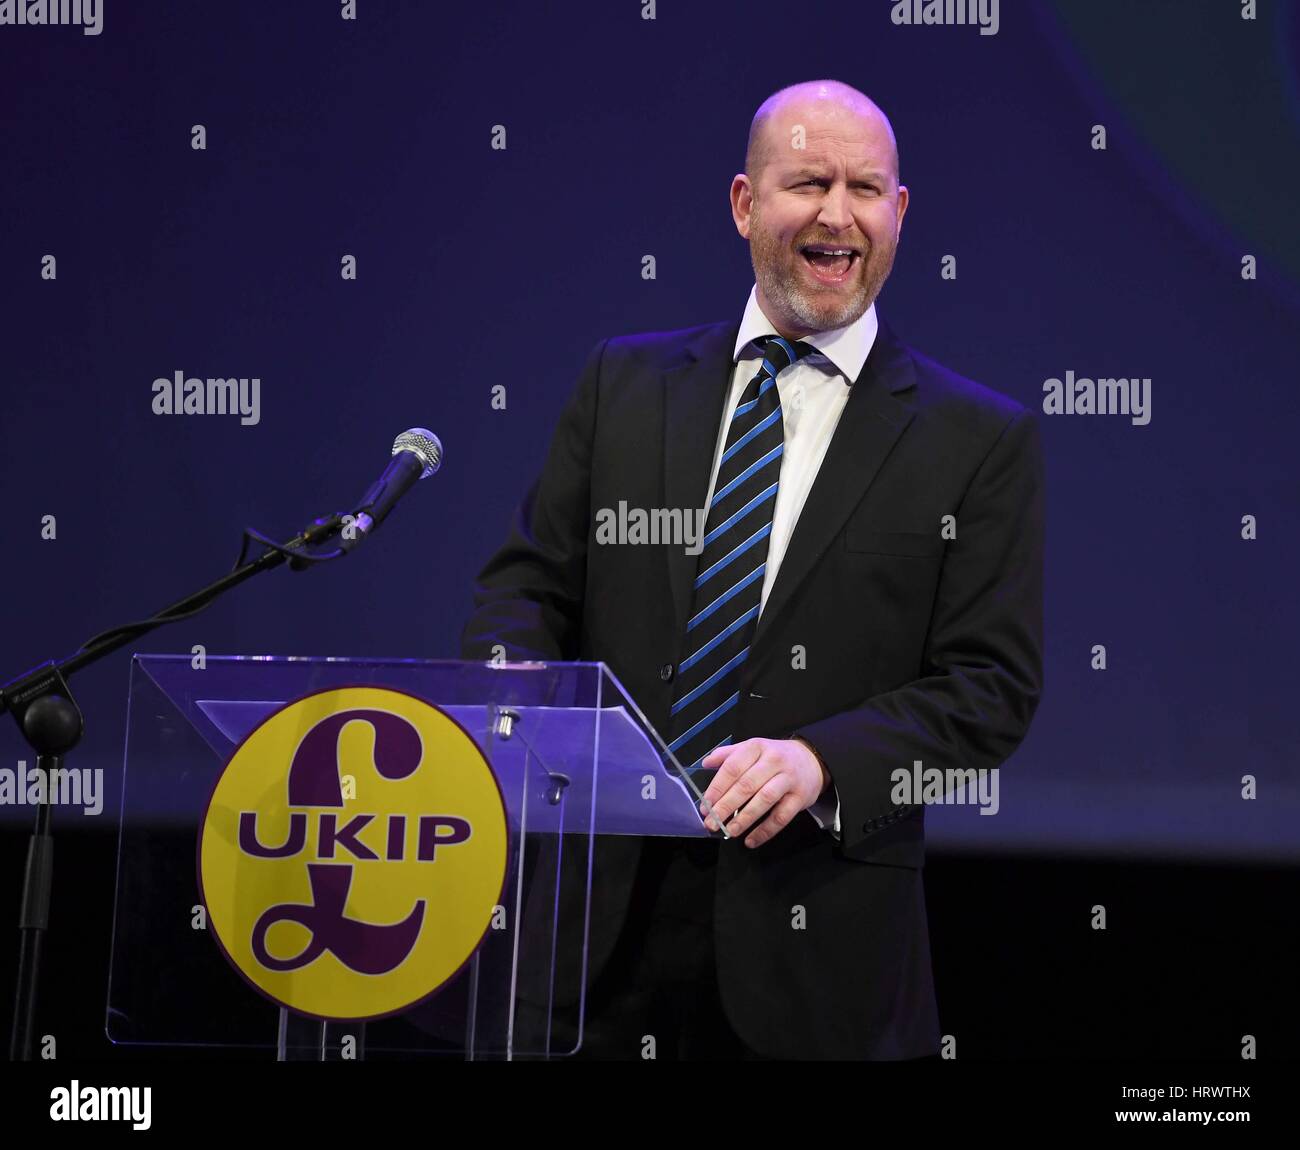 Weymouth, Dorset, UK. 4th Mar, 2017. UK Independence Party conference, UKIP, Conference speech by Paul Nuttall, MEP and Party Leader Credit: Dorset Media Service/Alamy Live News Stock Photo